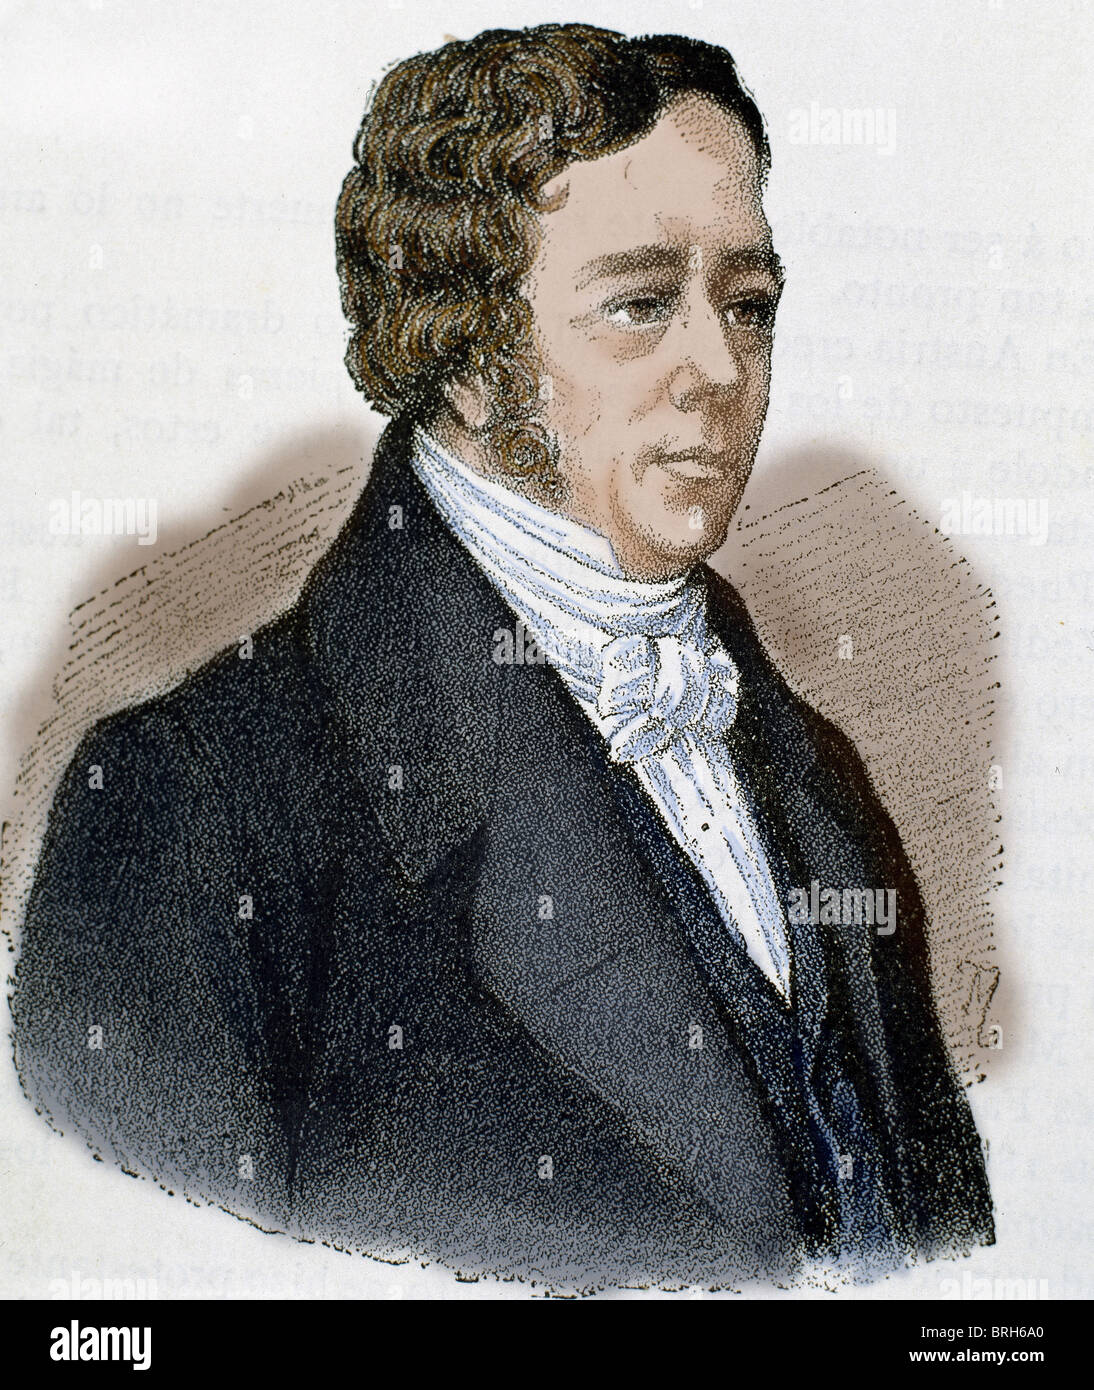 Oersted, Hans Christian (1777-1851). Danish physicist. Colored engraving. Stock Photo